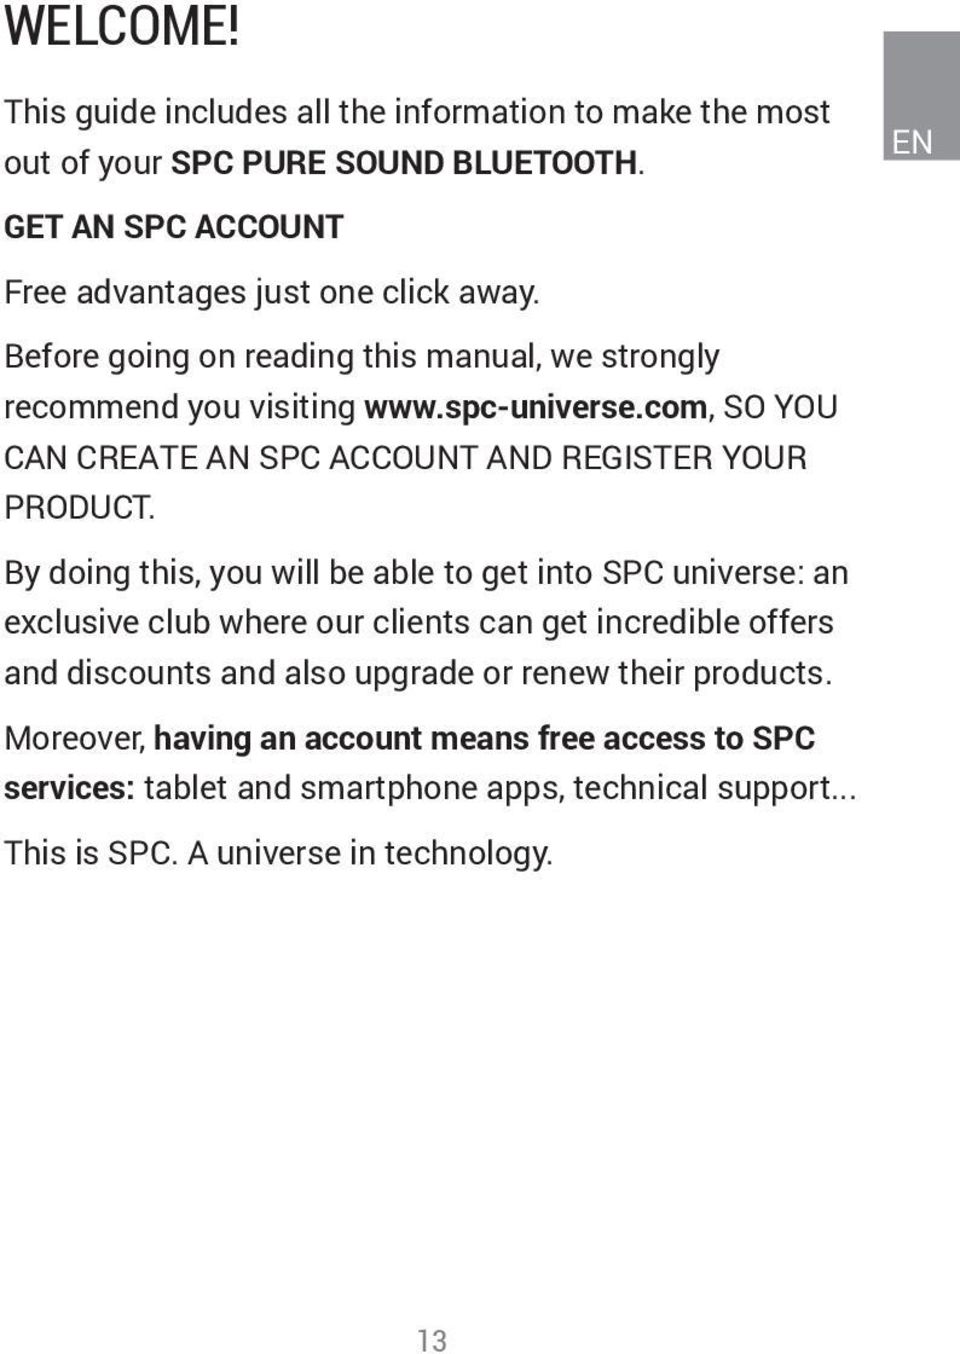 By doing this, you will be able to get into SPC universe: an exclusive club where our clients can get incredible offers and discounts and also upgrade or renew